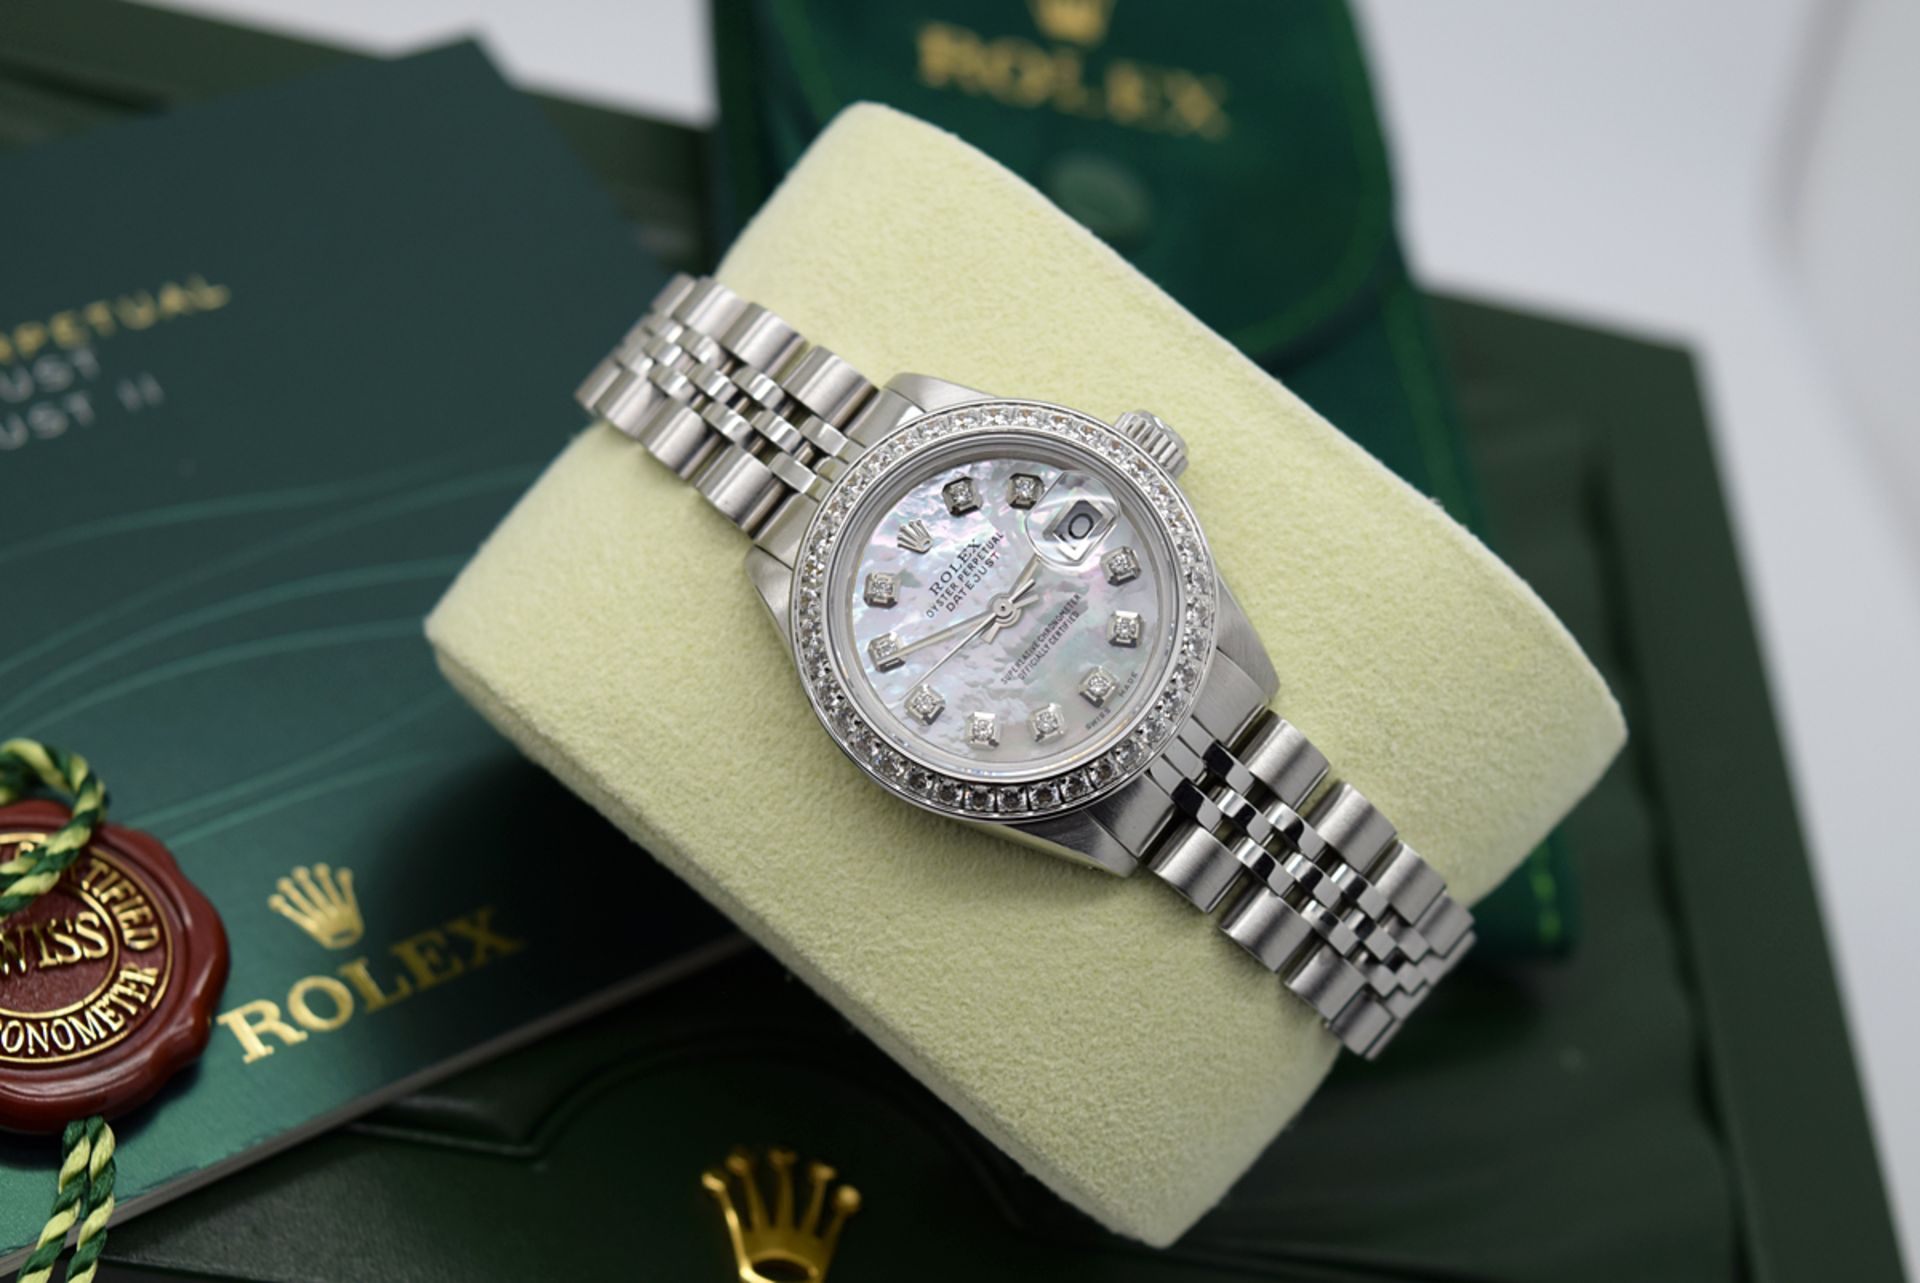 *STUNNING* ROLEX LADY DATEJUST - STAINLESS STEEL, DIAMOND MOP DIAL - Image 7 of 10